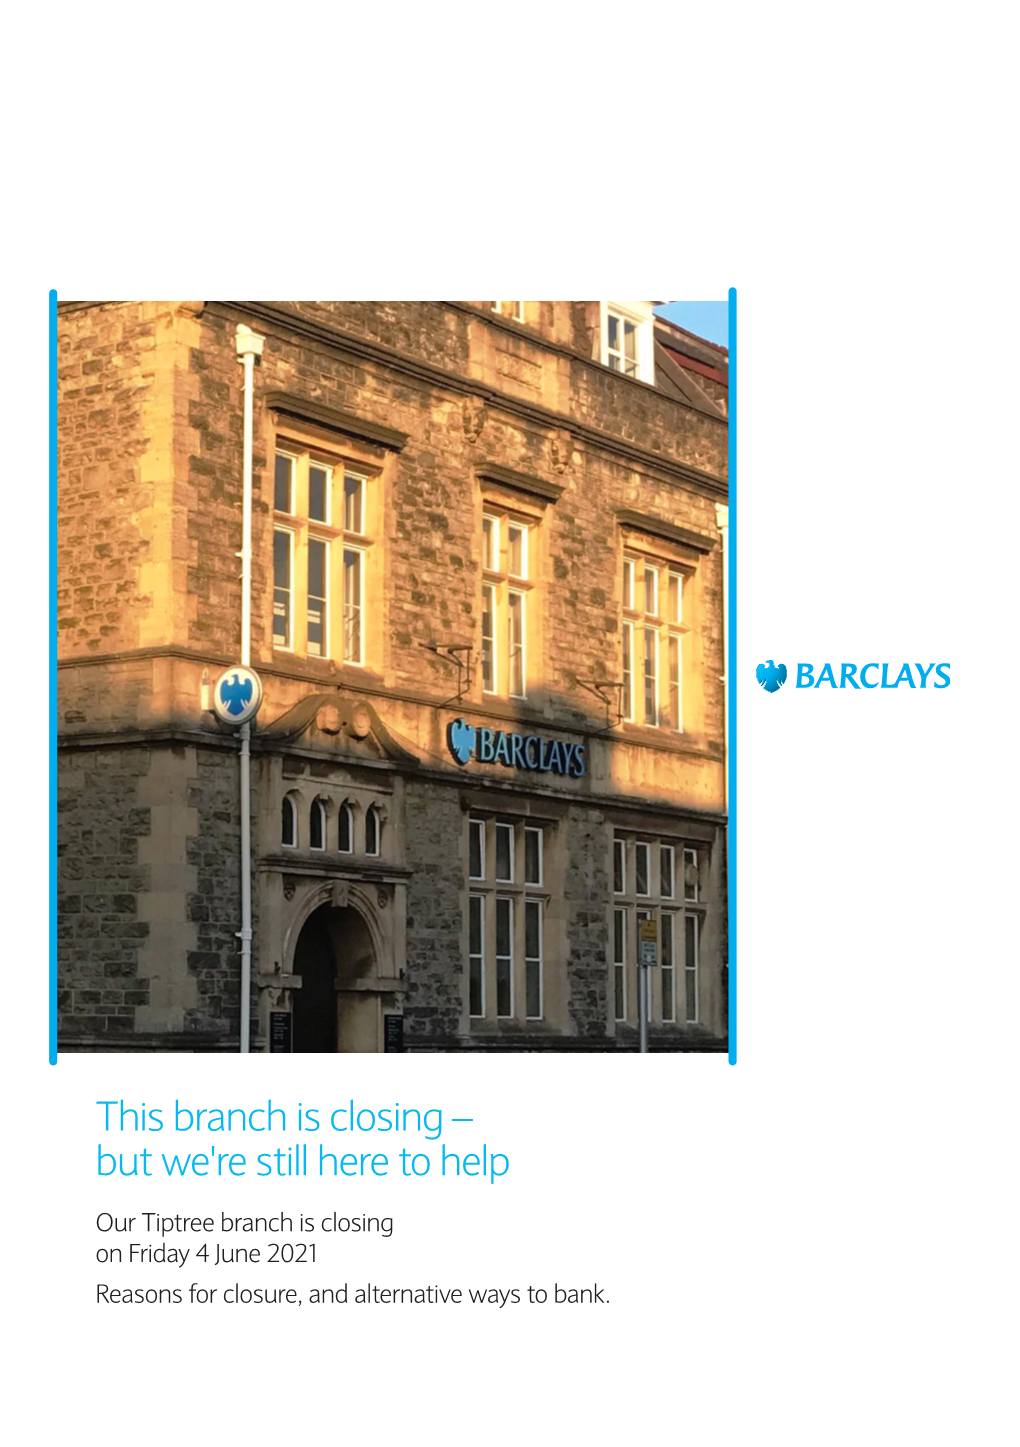 Tiptree Branch Is Closing on Friday 4 June 2021 Reasons for Closure, and Alternative Ways to Bank